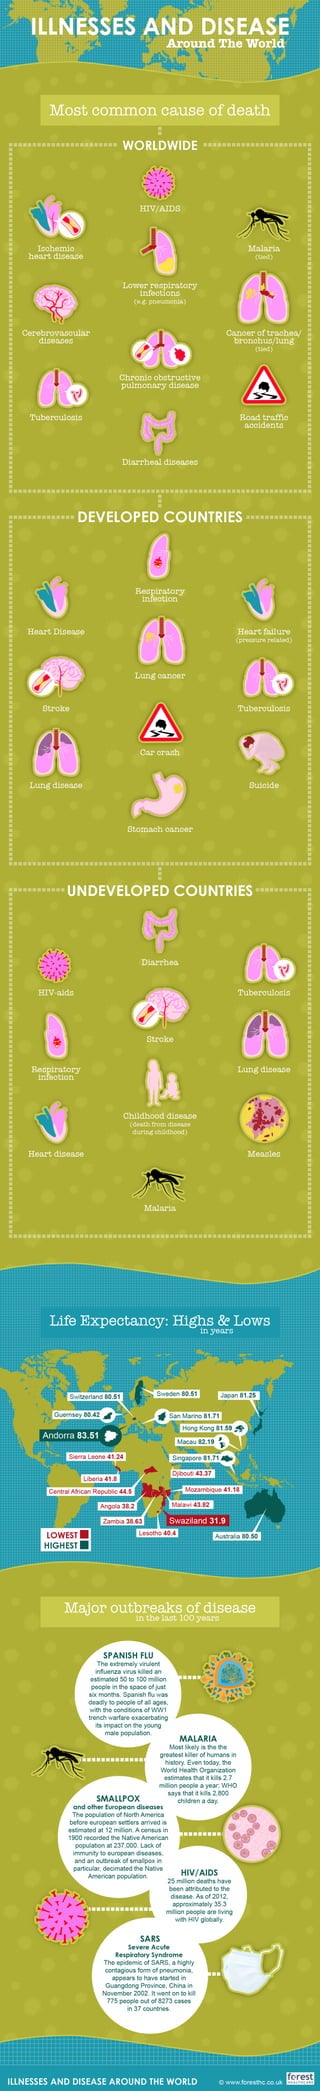 Illnesses Diseases of The World